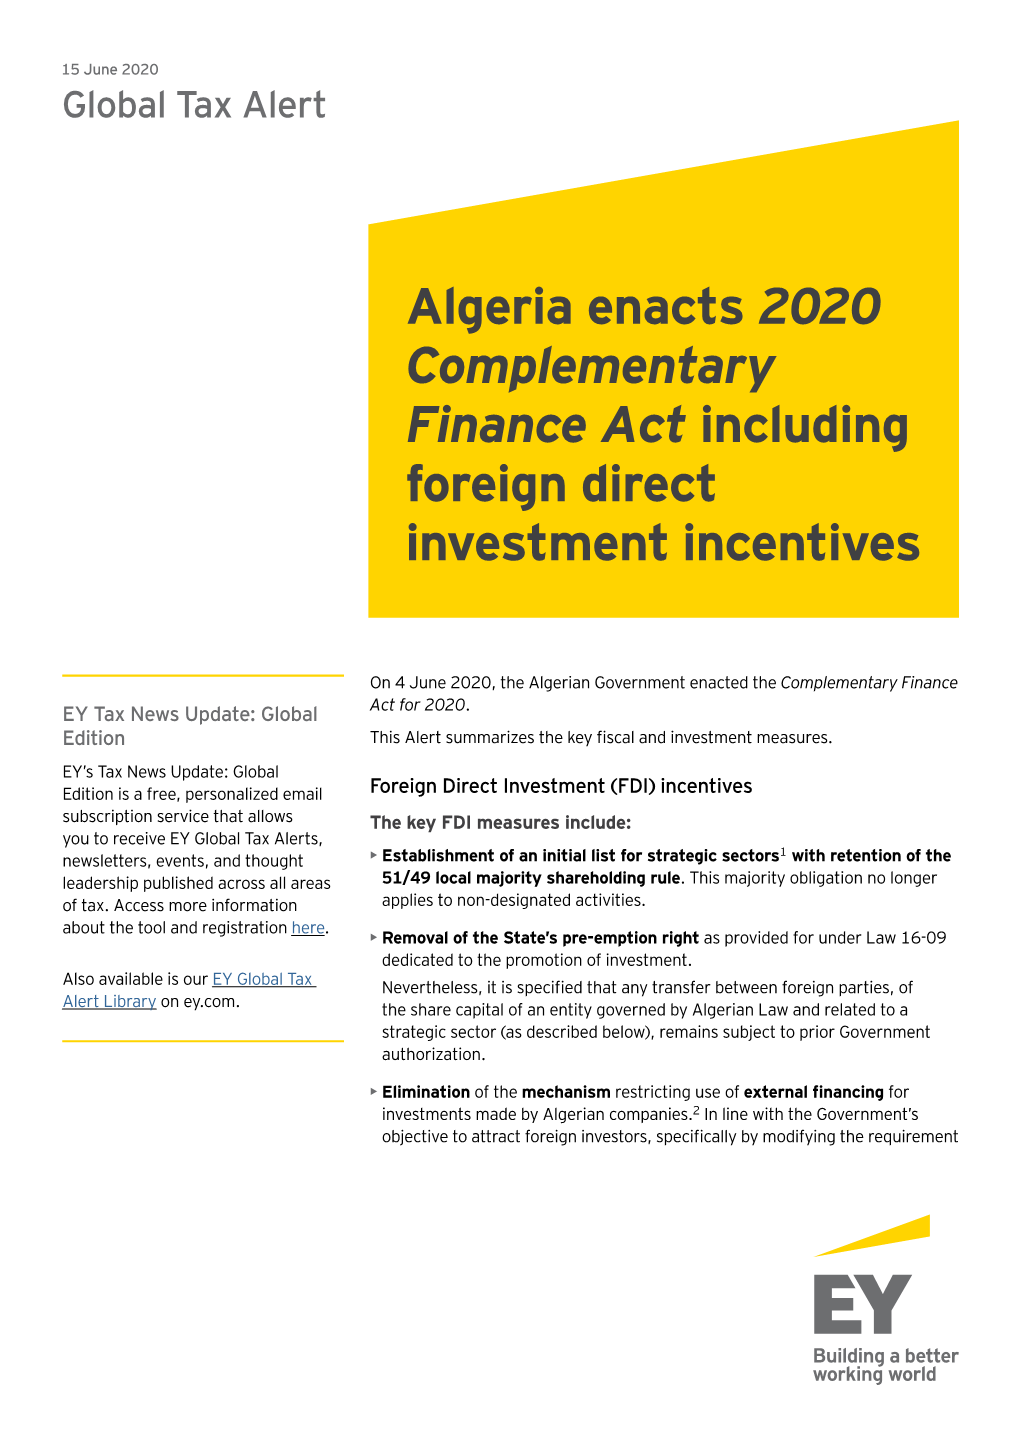 Algeria Enacts 2020 Complementary Finance Act Including Foreign Direct Investment Incentives